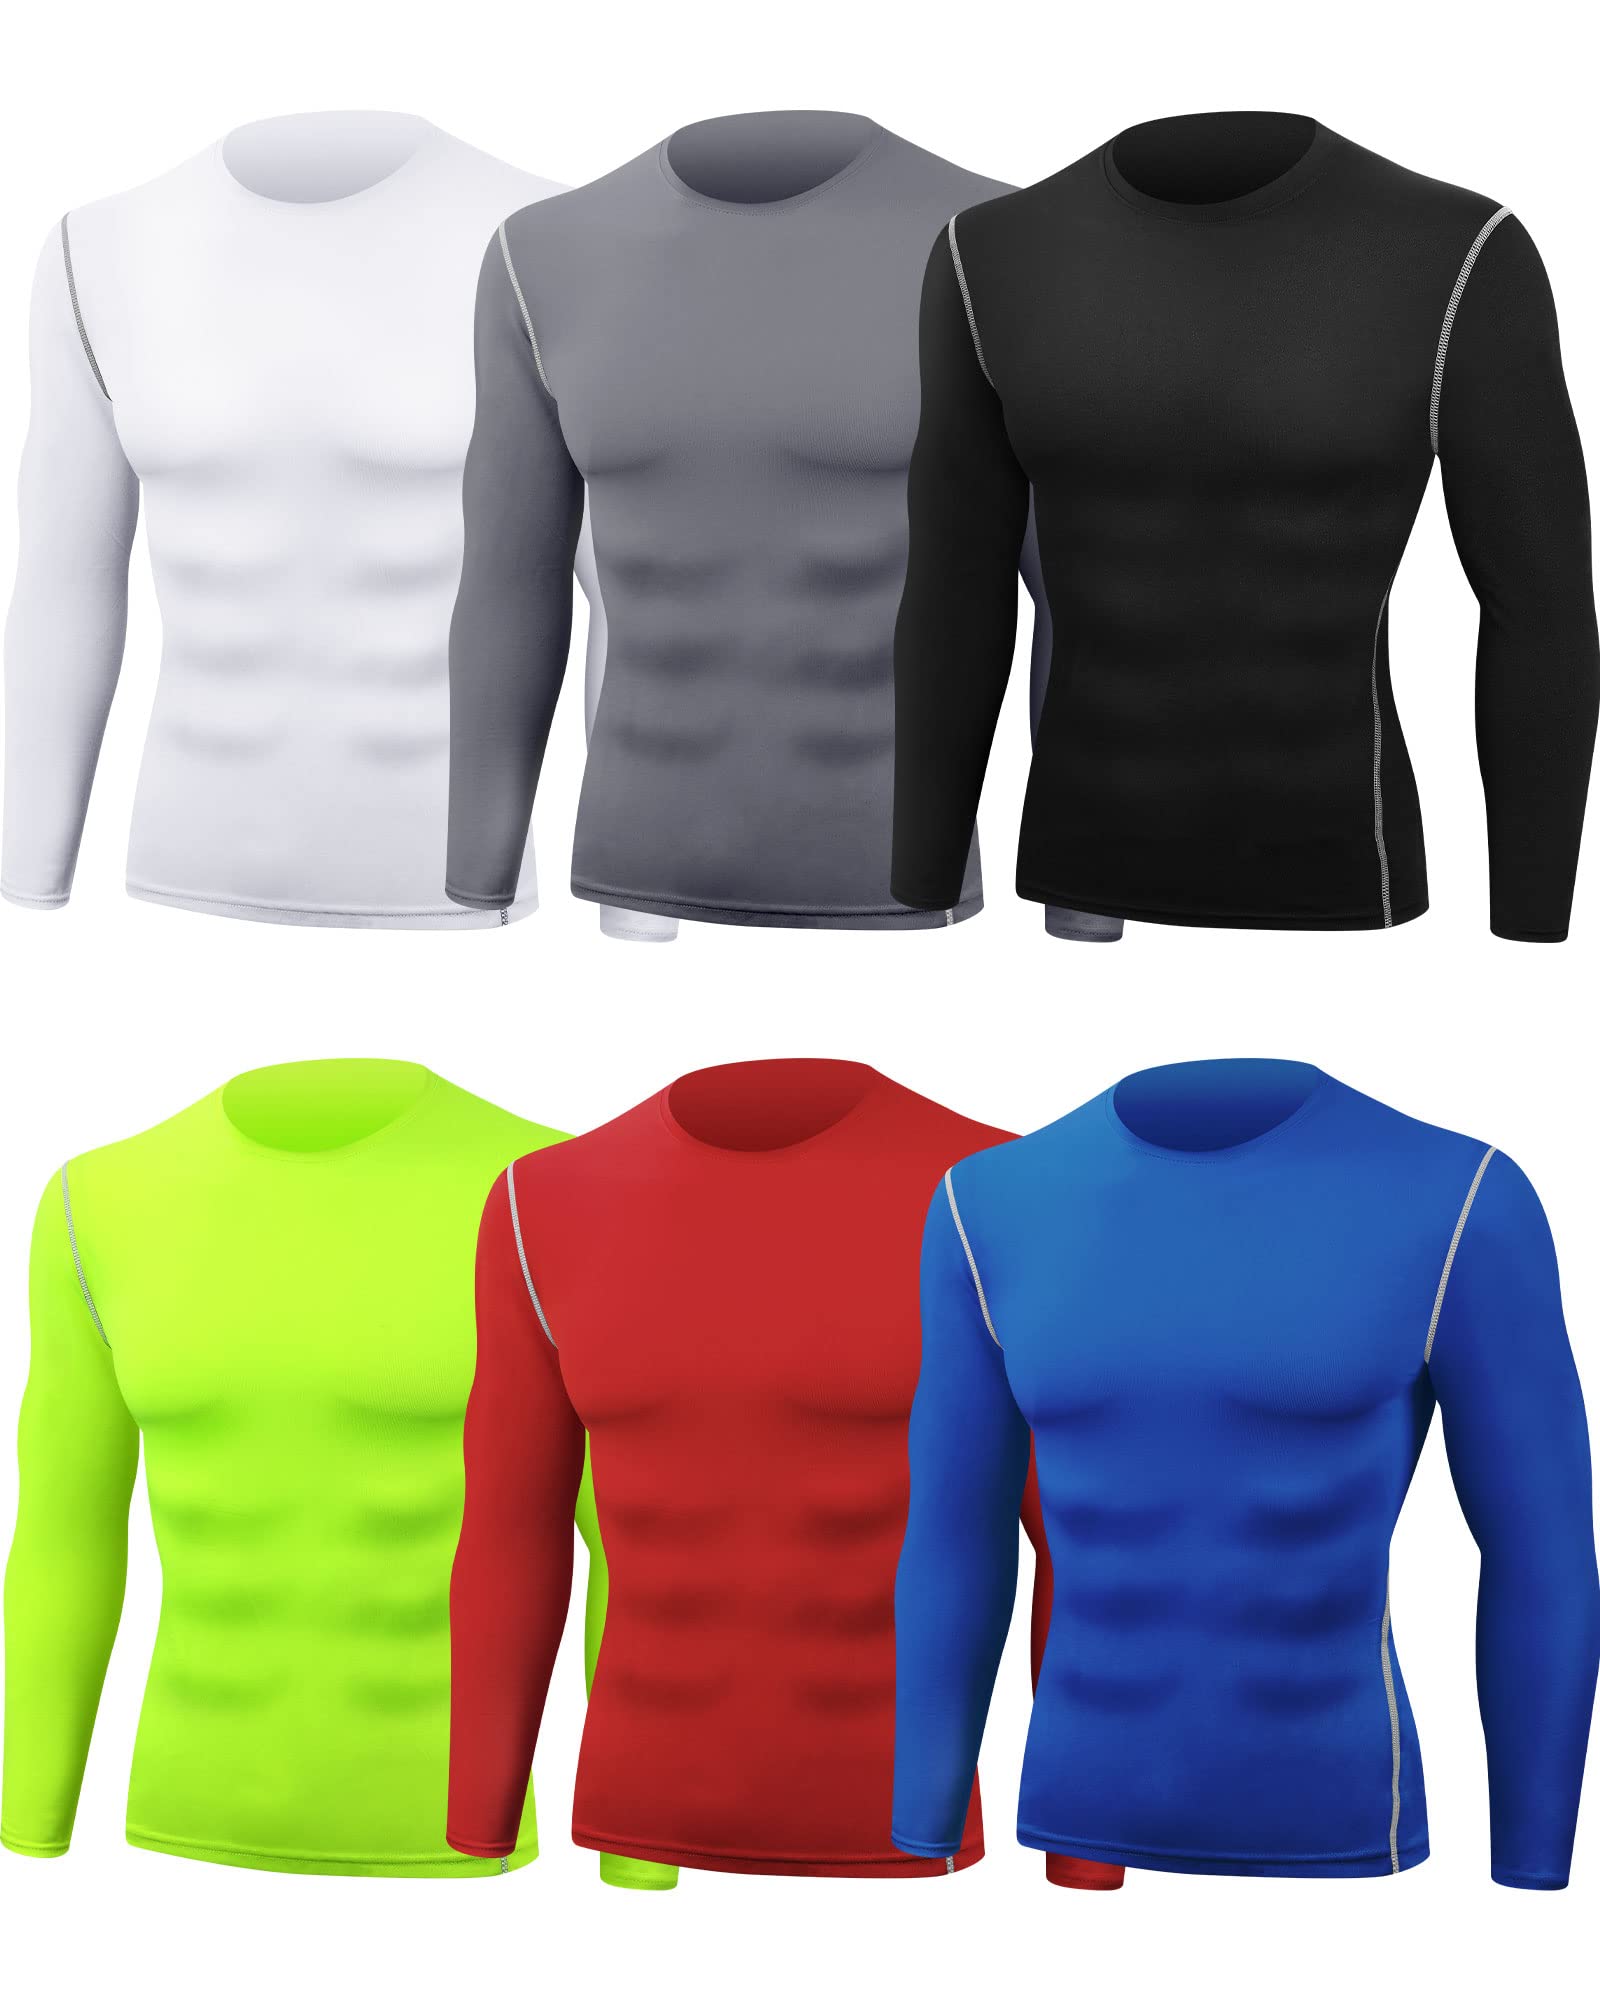 Hicarer 6 Pack Men's Athletic Compression Shirts Dry Athletic Workout  Running Shirts Long Sleeve Top Sport